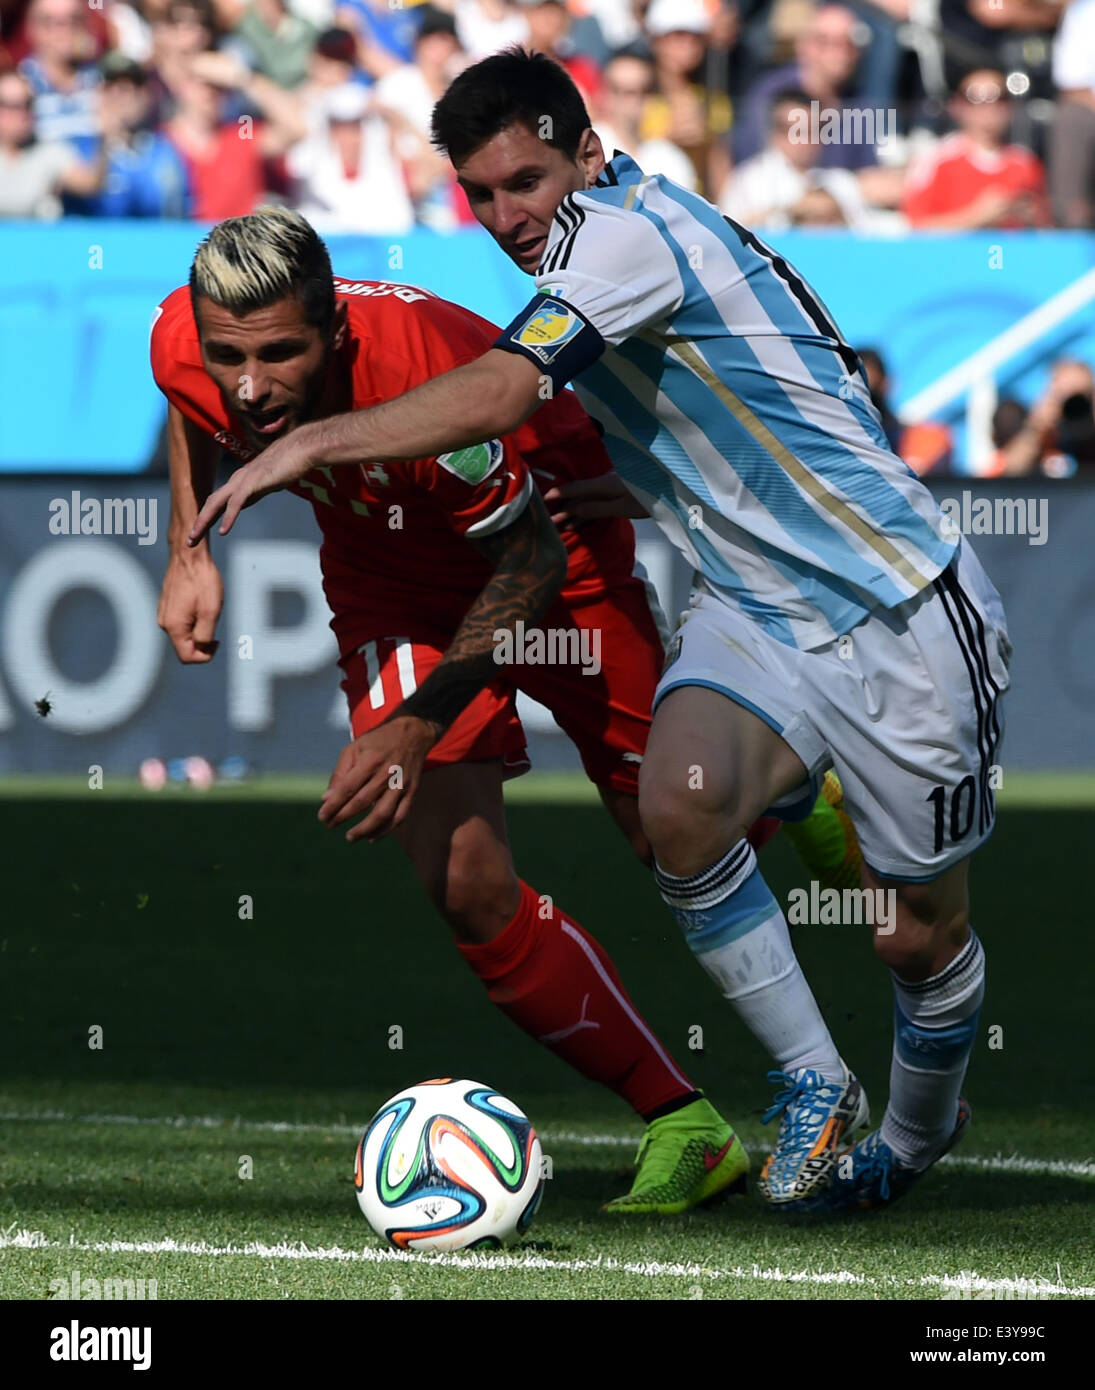 Sao Paulo, Brazil. 1st July, 2014. Argentina's Lionel Messi vies with Switzerland's Valon Behrami during a Round of 16 match between Argentina and Switzerland of 2014 FIFA World Cup at the Arena de Sao Paulo Stadium in Sao Paulo, Brazil, on July 1, 2014. Credit:  Wang Yuguo/Xinhua/Alamy Live News Stock Photo